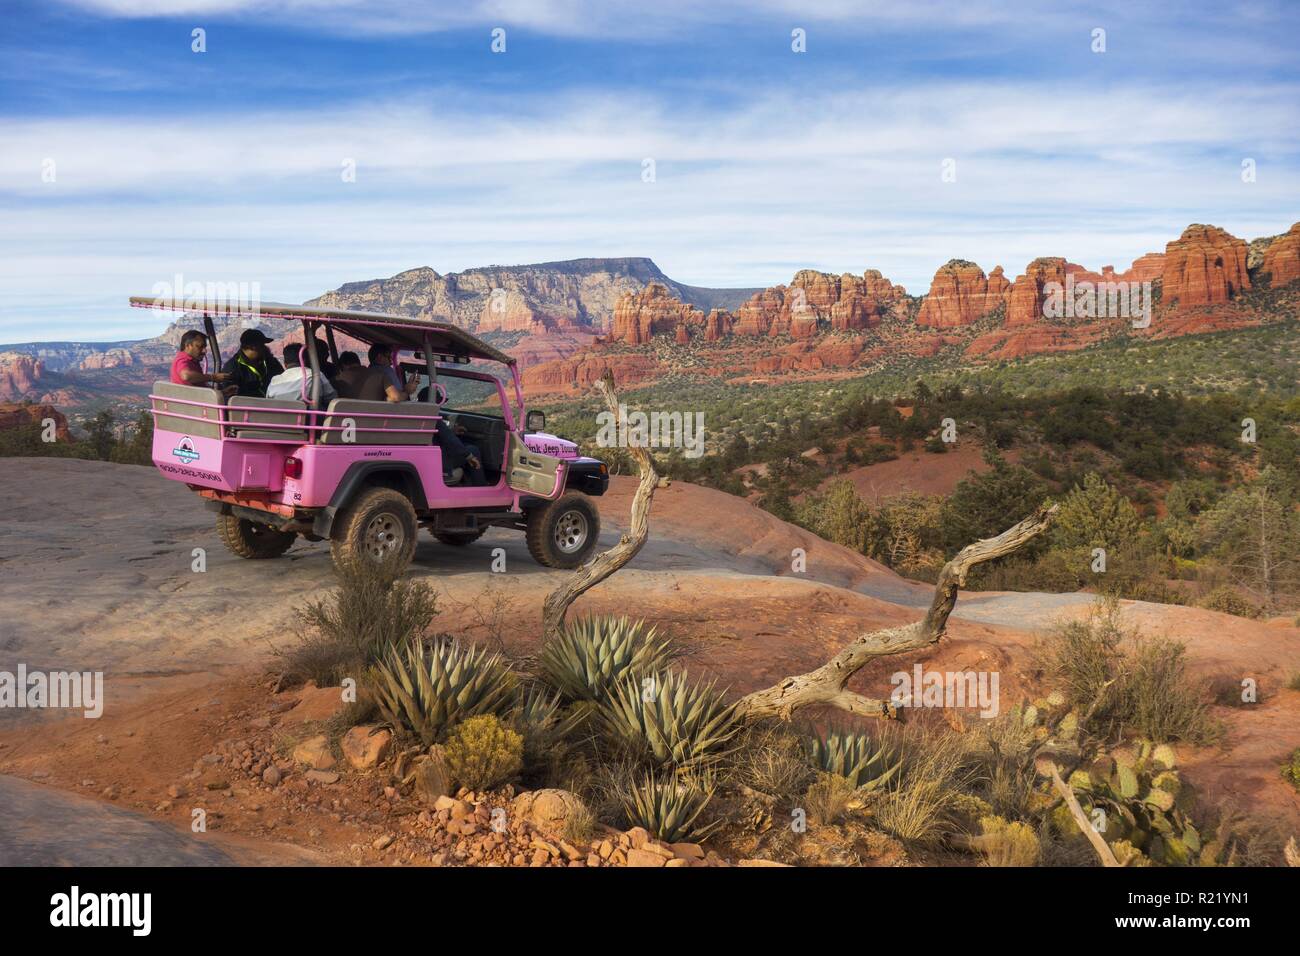 Pink Jeep Off Road Terrain High Clearance Sports Utility Vehicle with Tourists. Broken Arrow Slick Rock Tour and canyon landscape view Sedona, Arizona Stock Photo